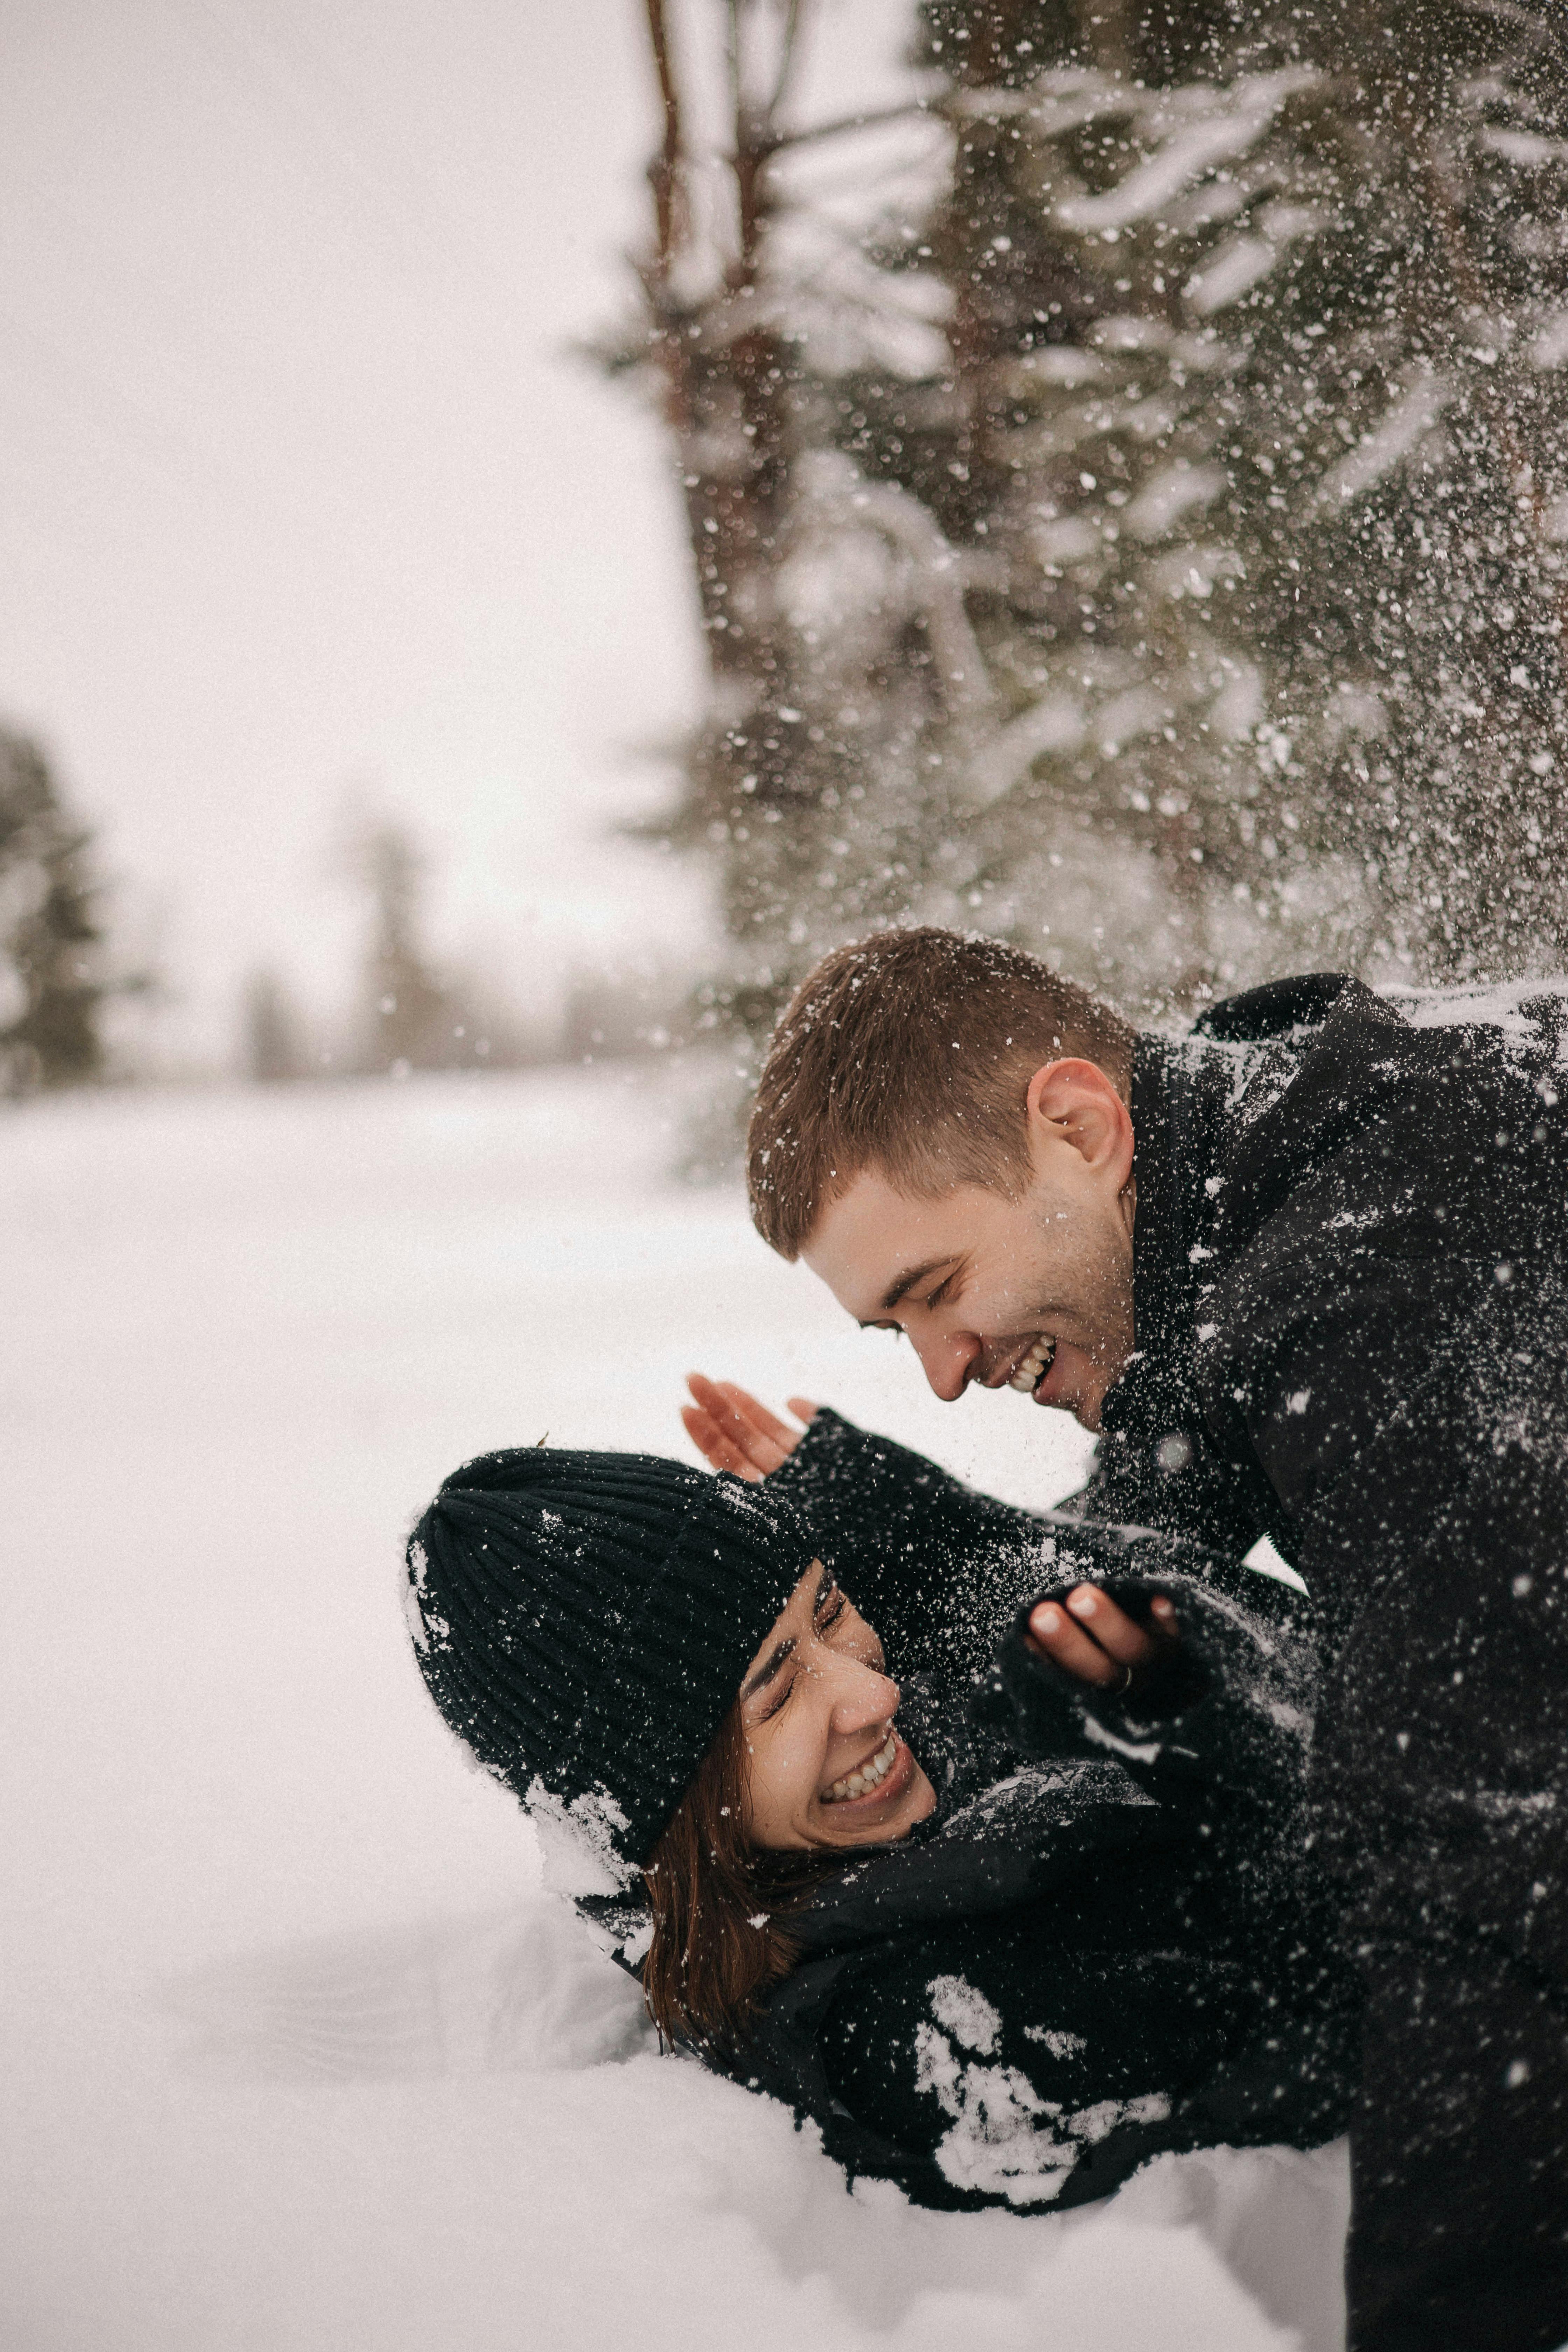 25 Snowy Engagement Photos to Inspire Your Own